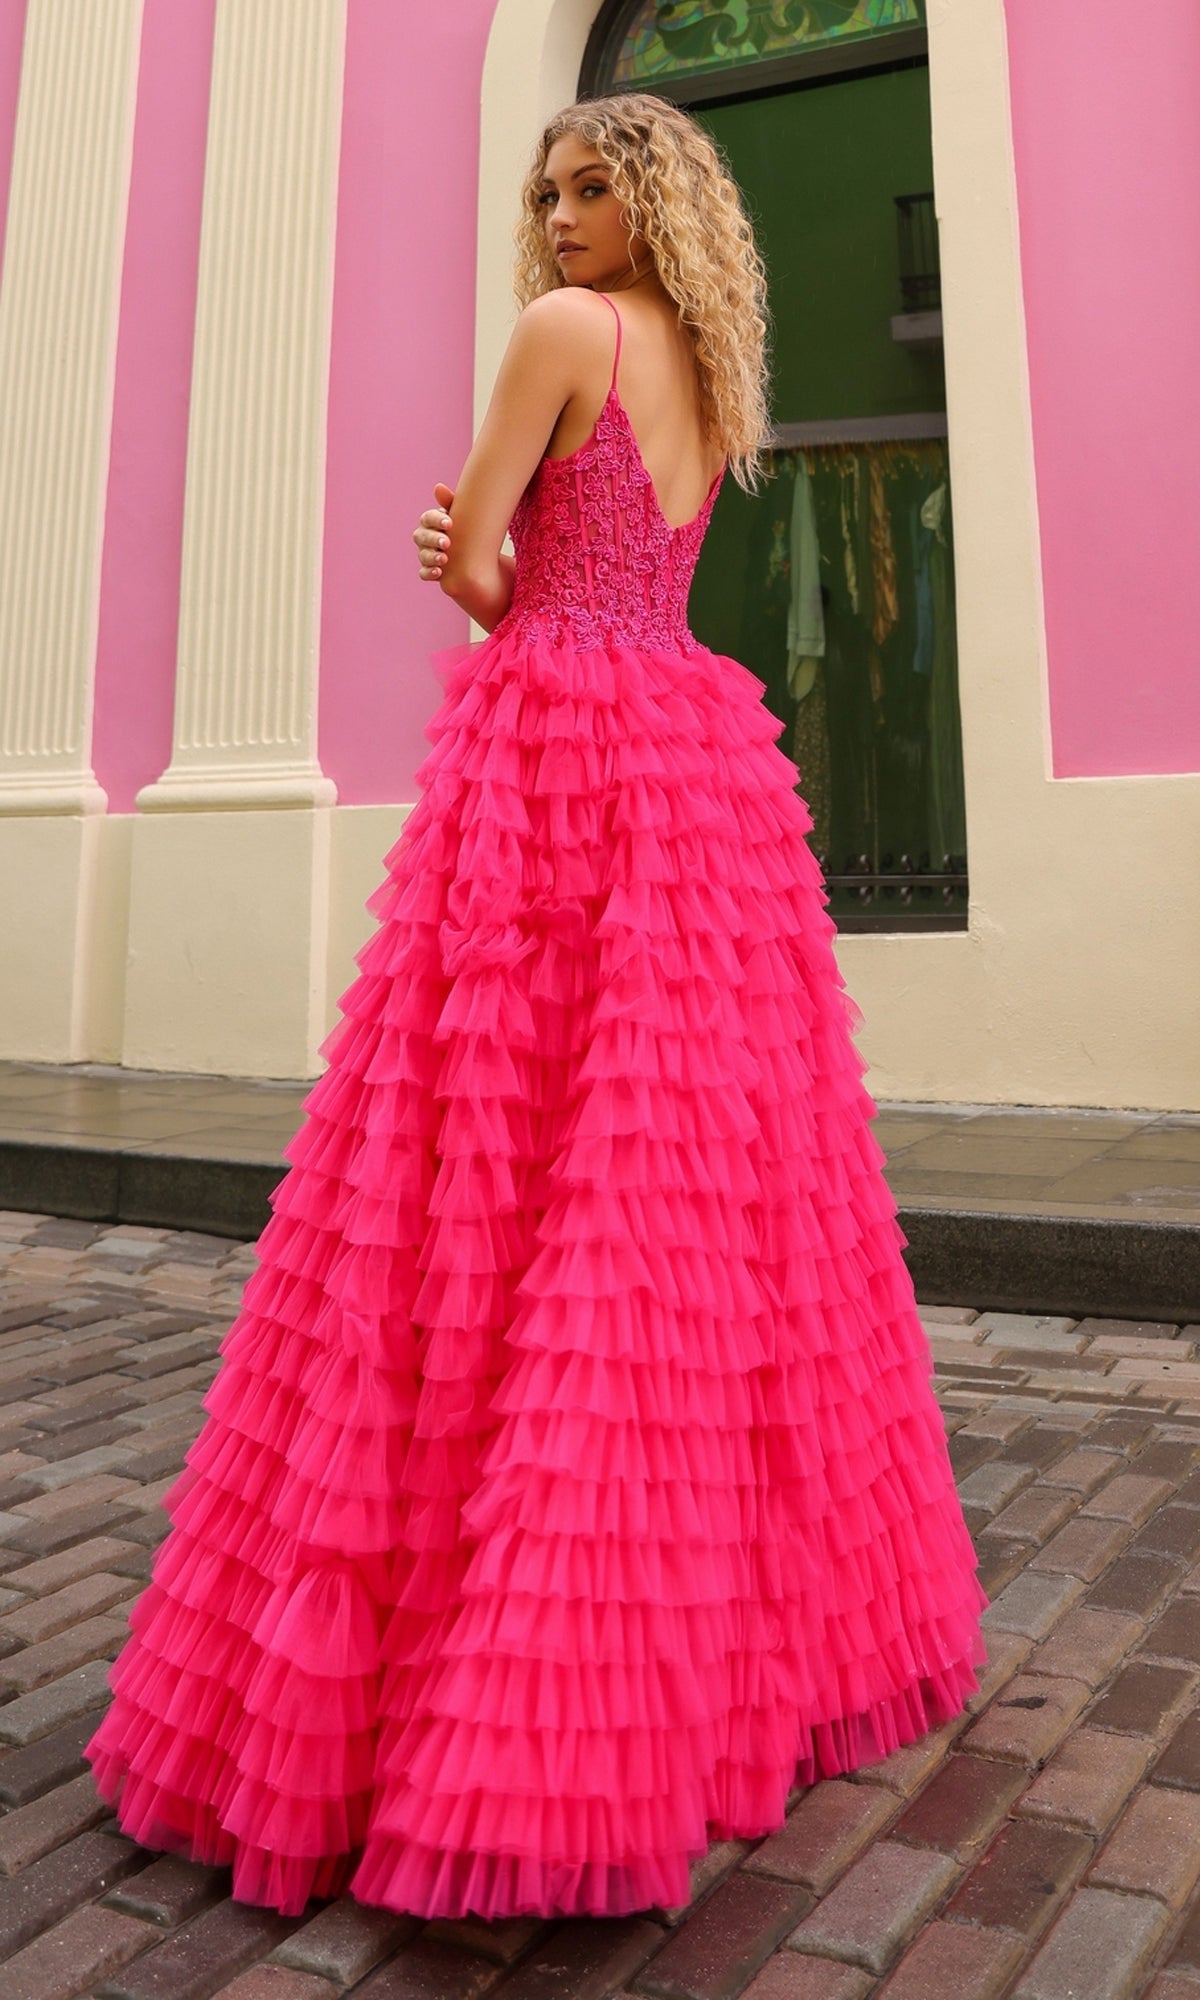 Lace-Bodice Ruffled Long Prom Ball Gown P1398